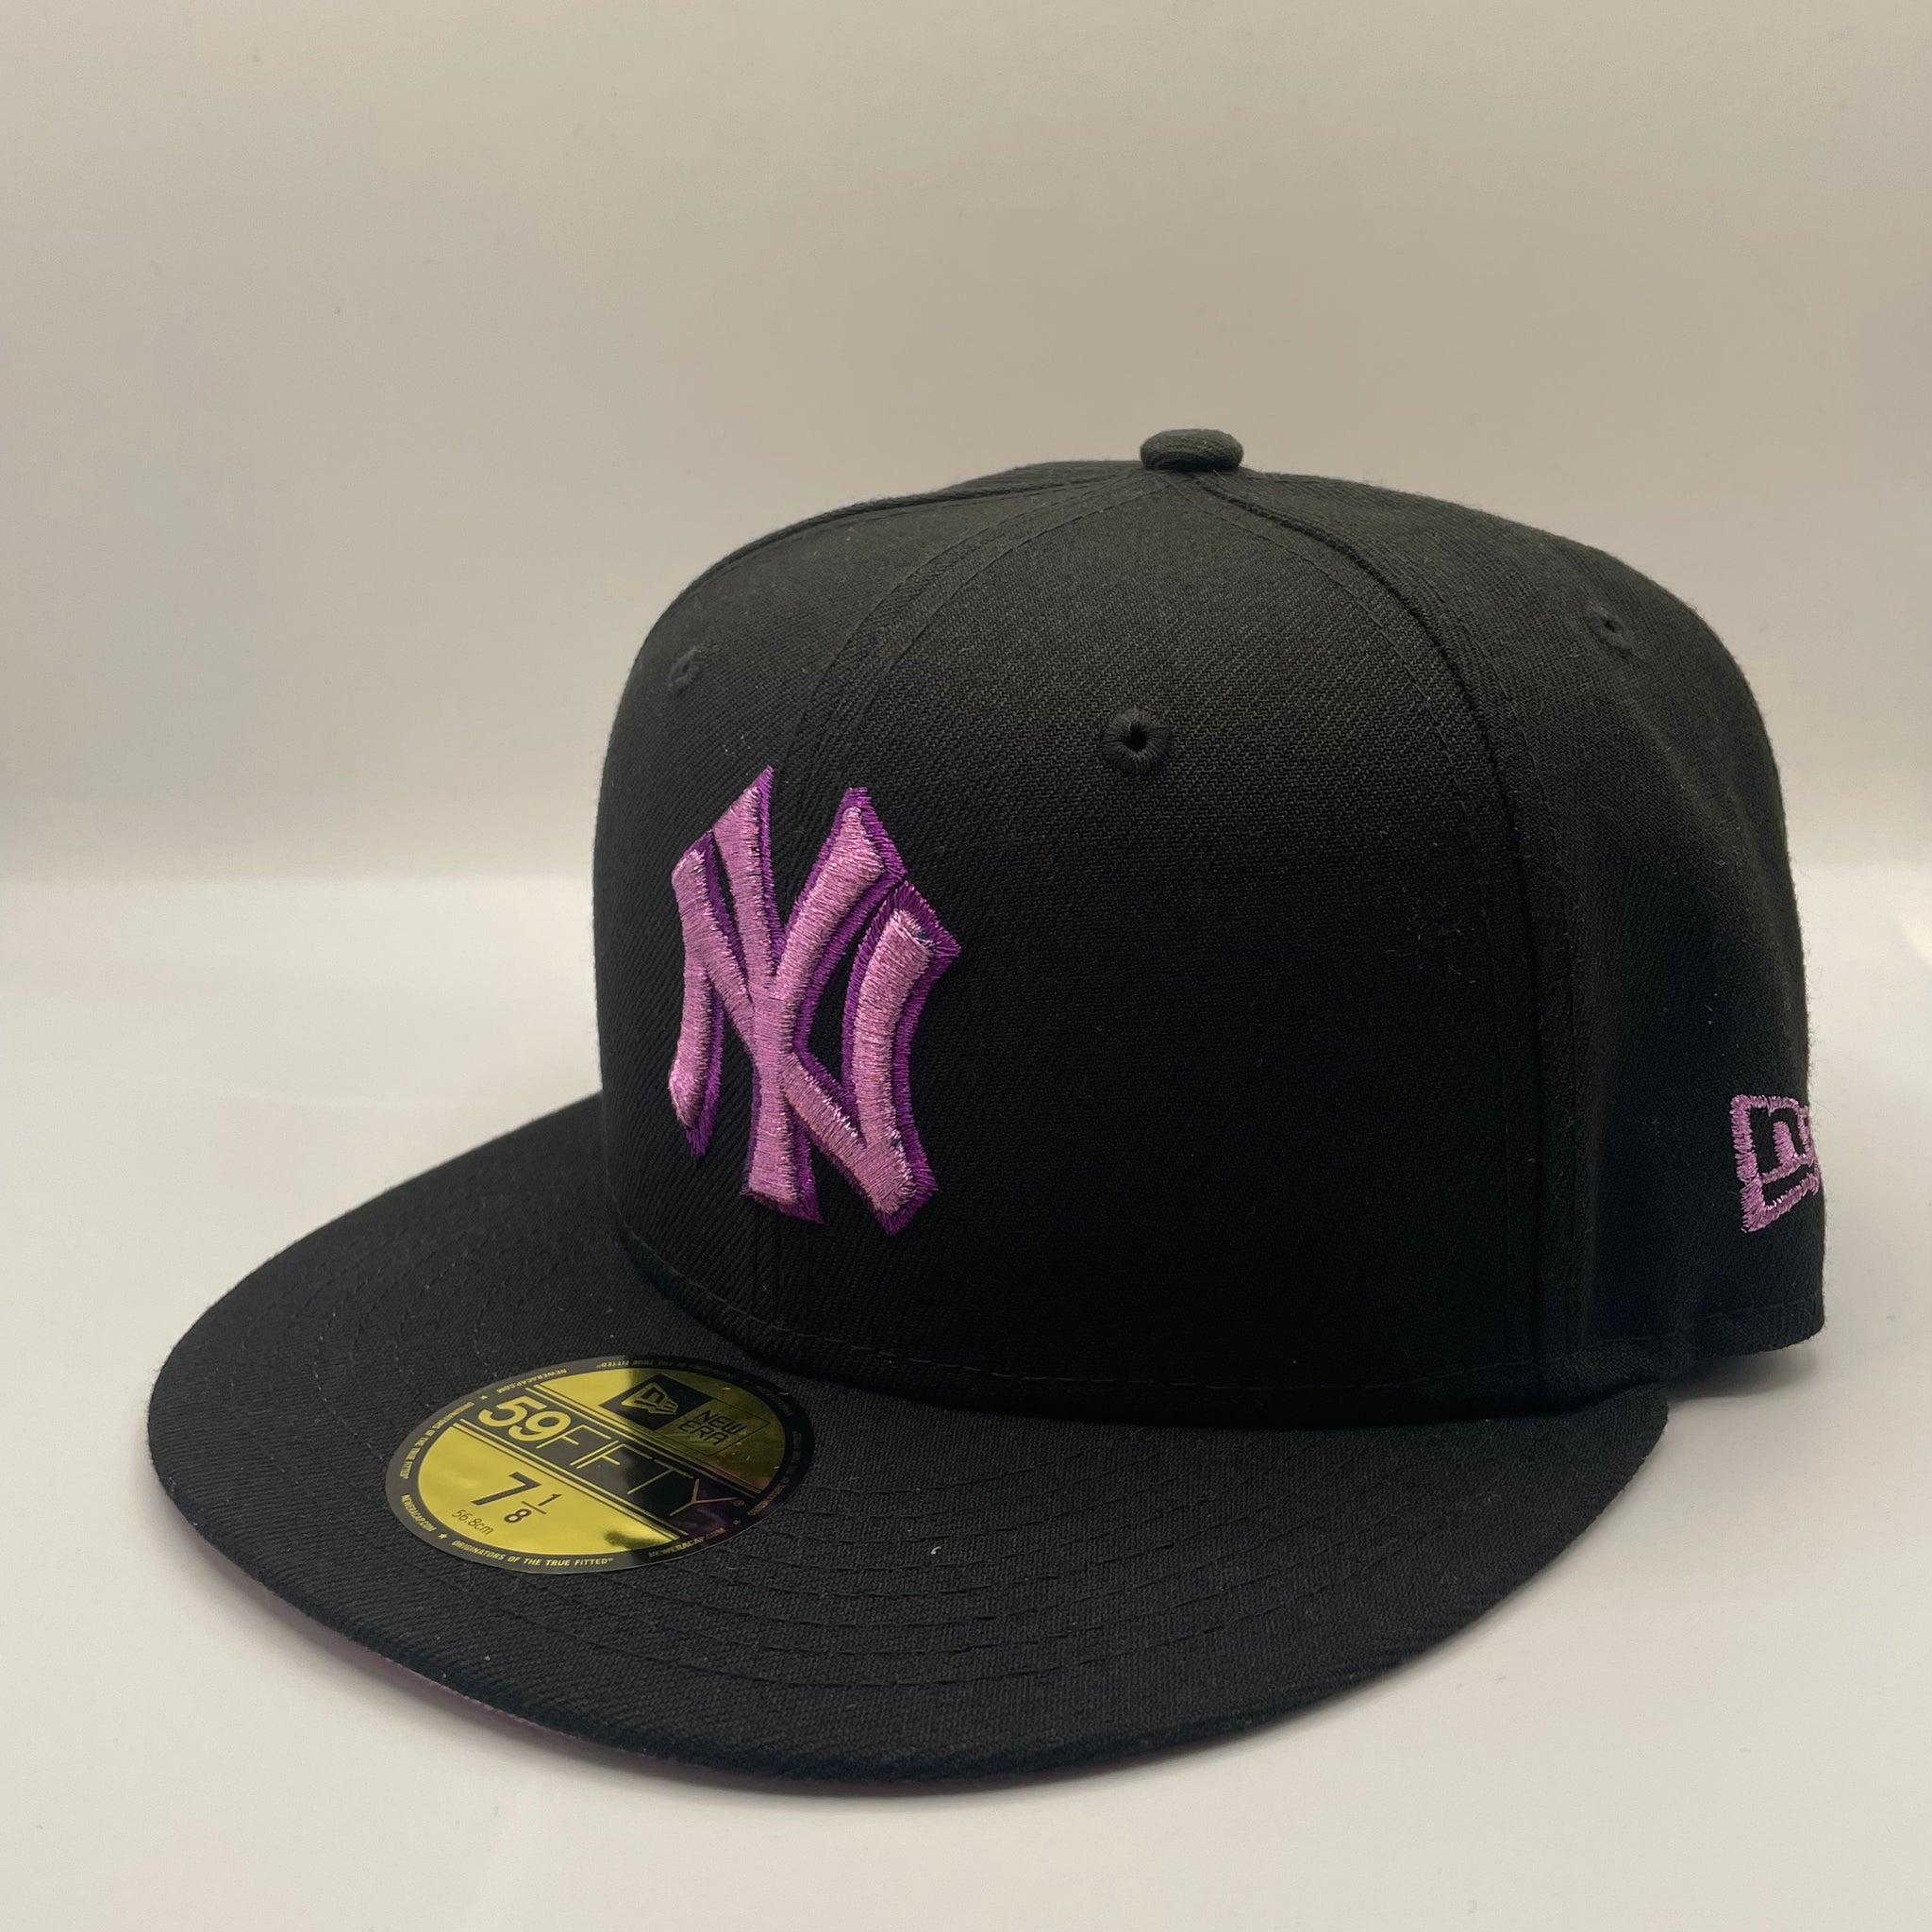 New York Yankees New Era 59FIFTY Metallic Pop Fitted Hat